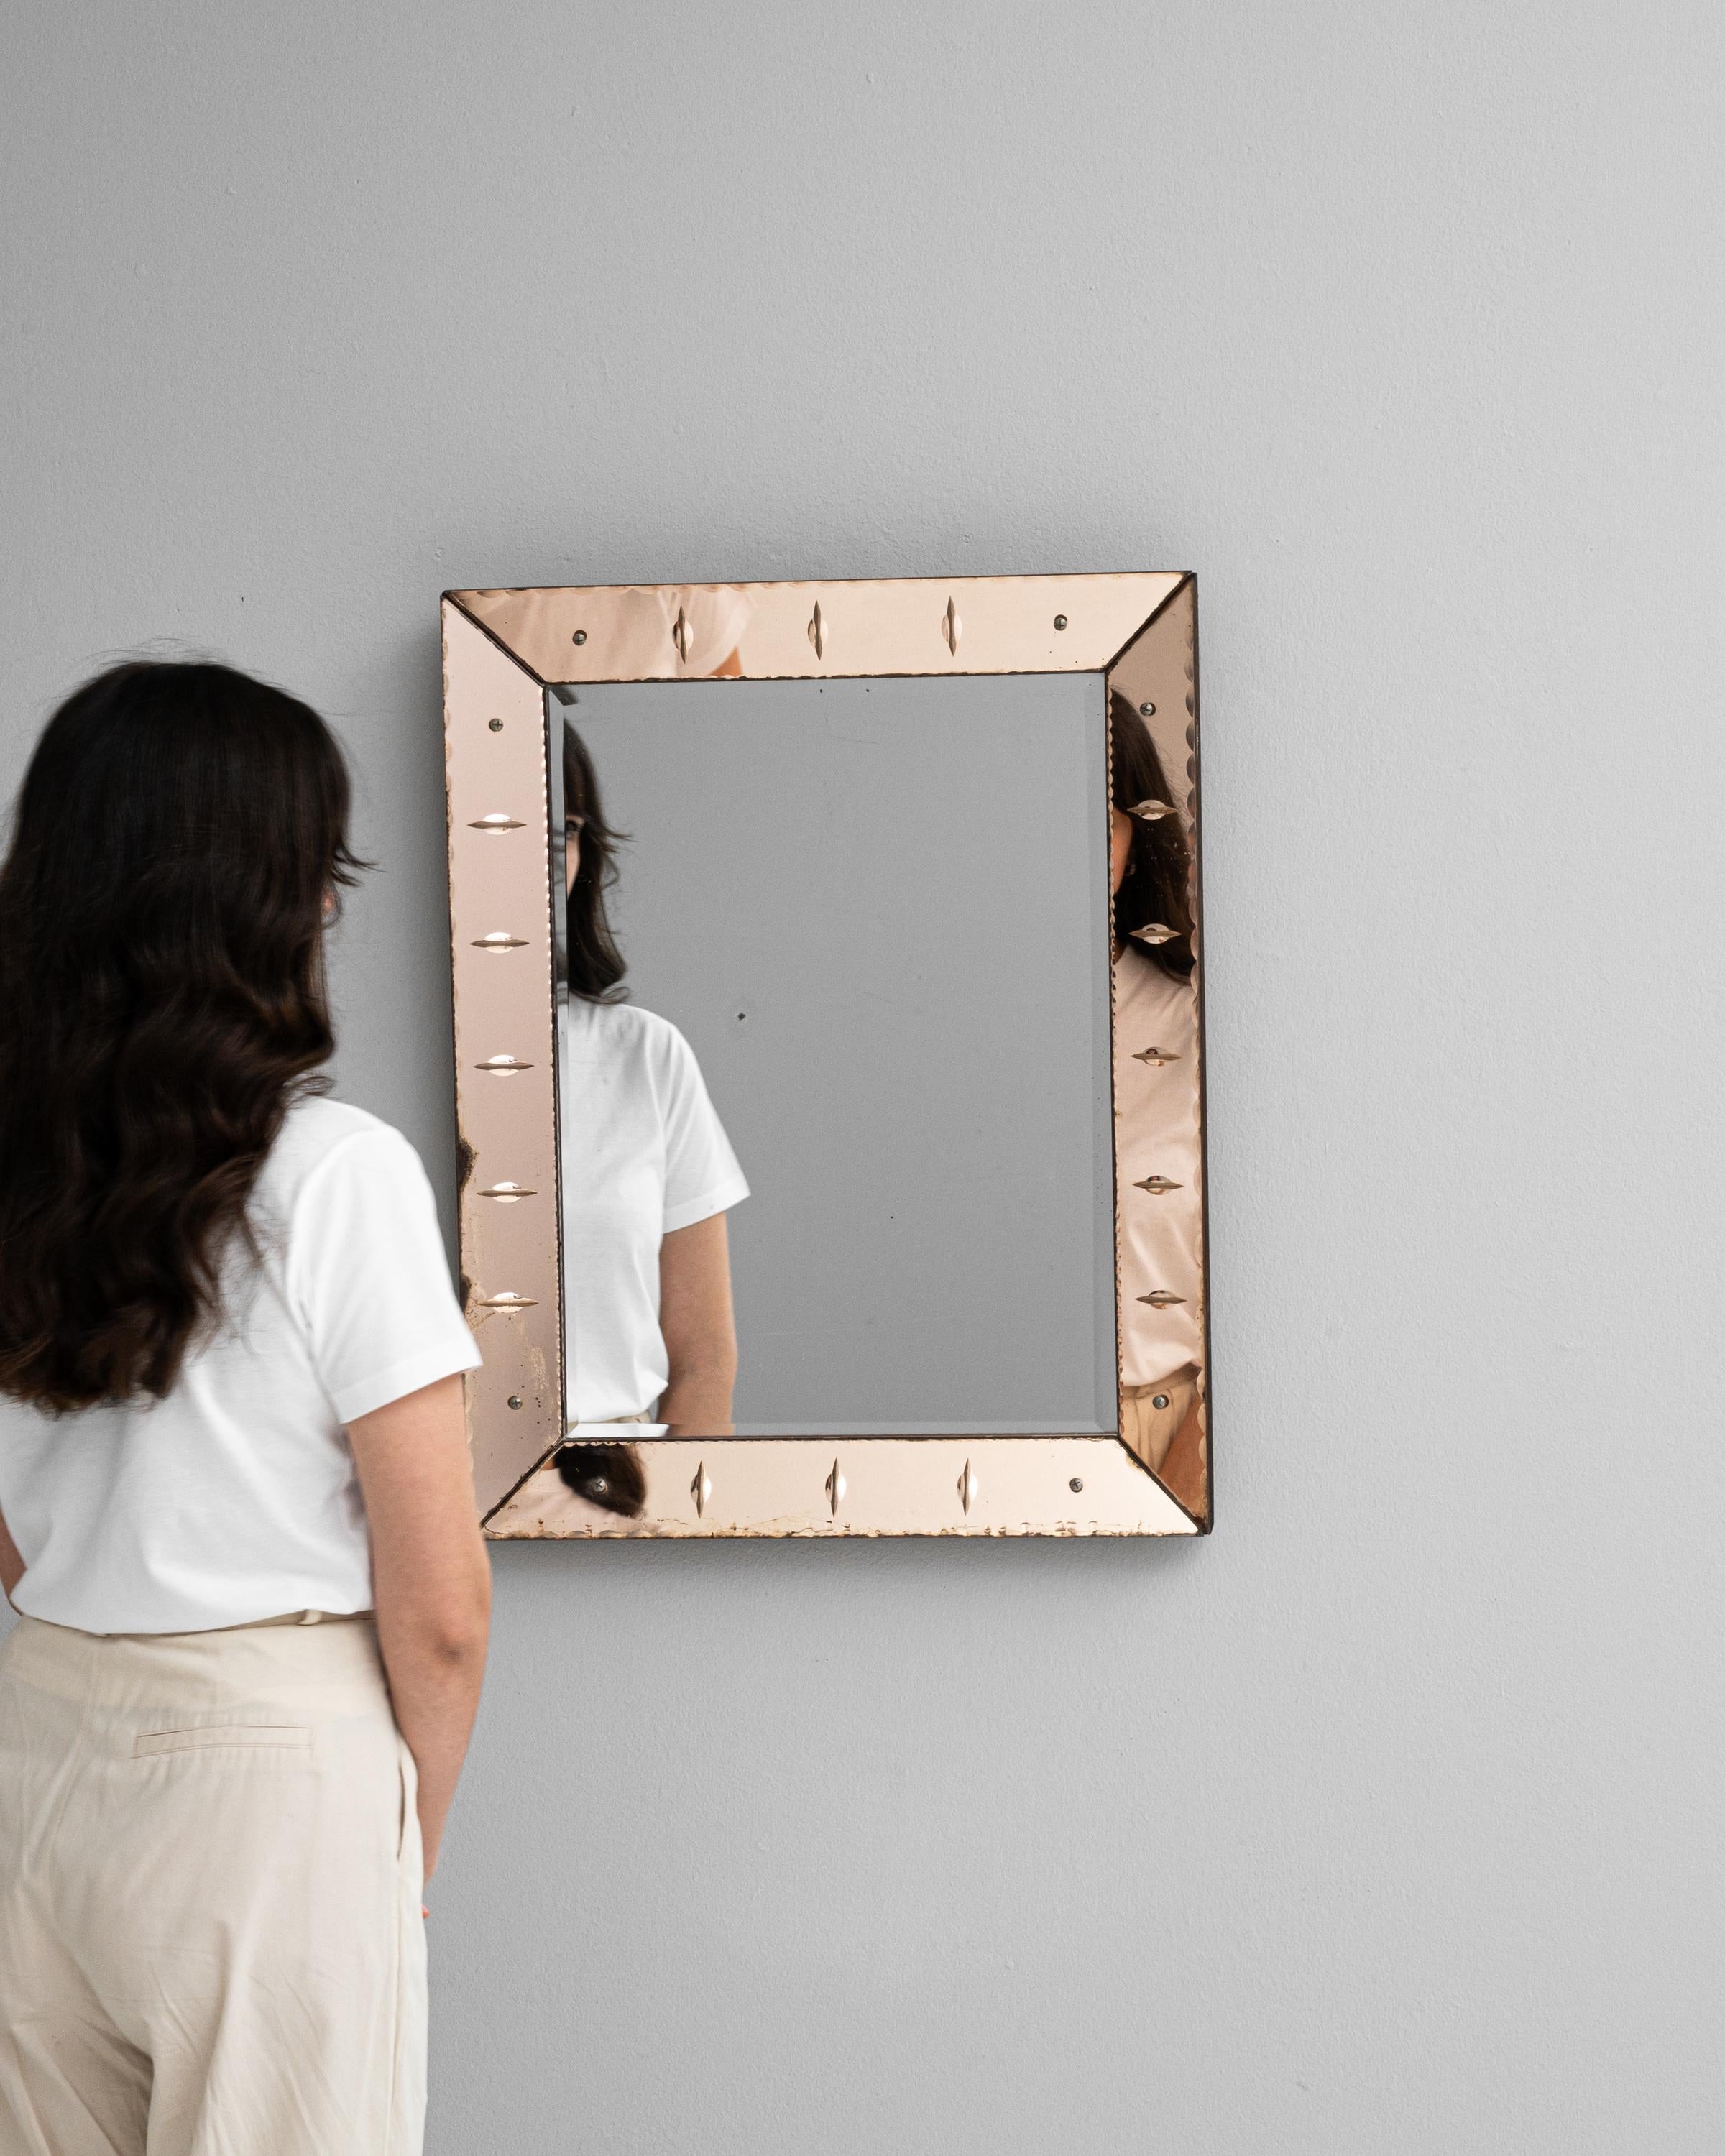 This 20th Century Italian Mirror is a charming reflection of minimalist artistry and mid-century design. The mirror, set within a sleek, square frame, is bordered by a delicate patina that suggests a gentle passage of time. The frame's understated